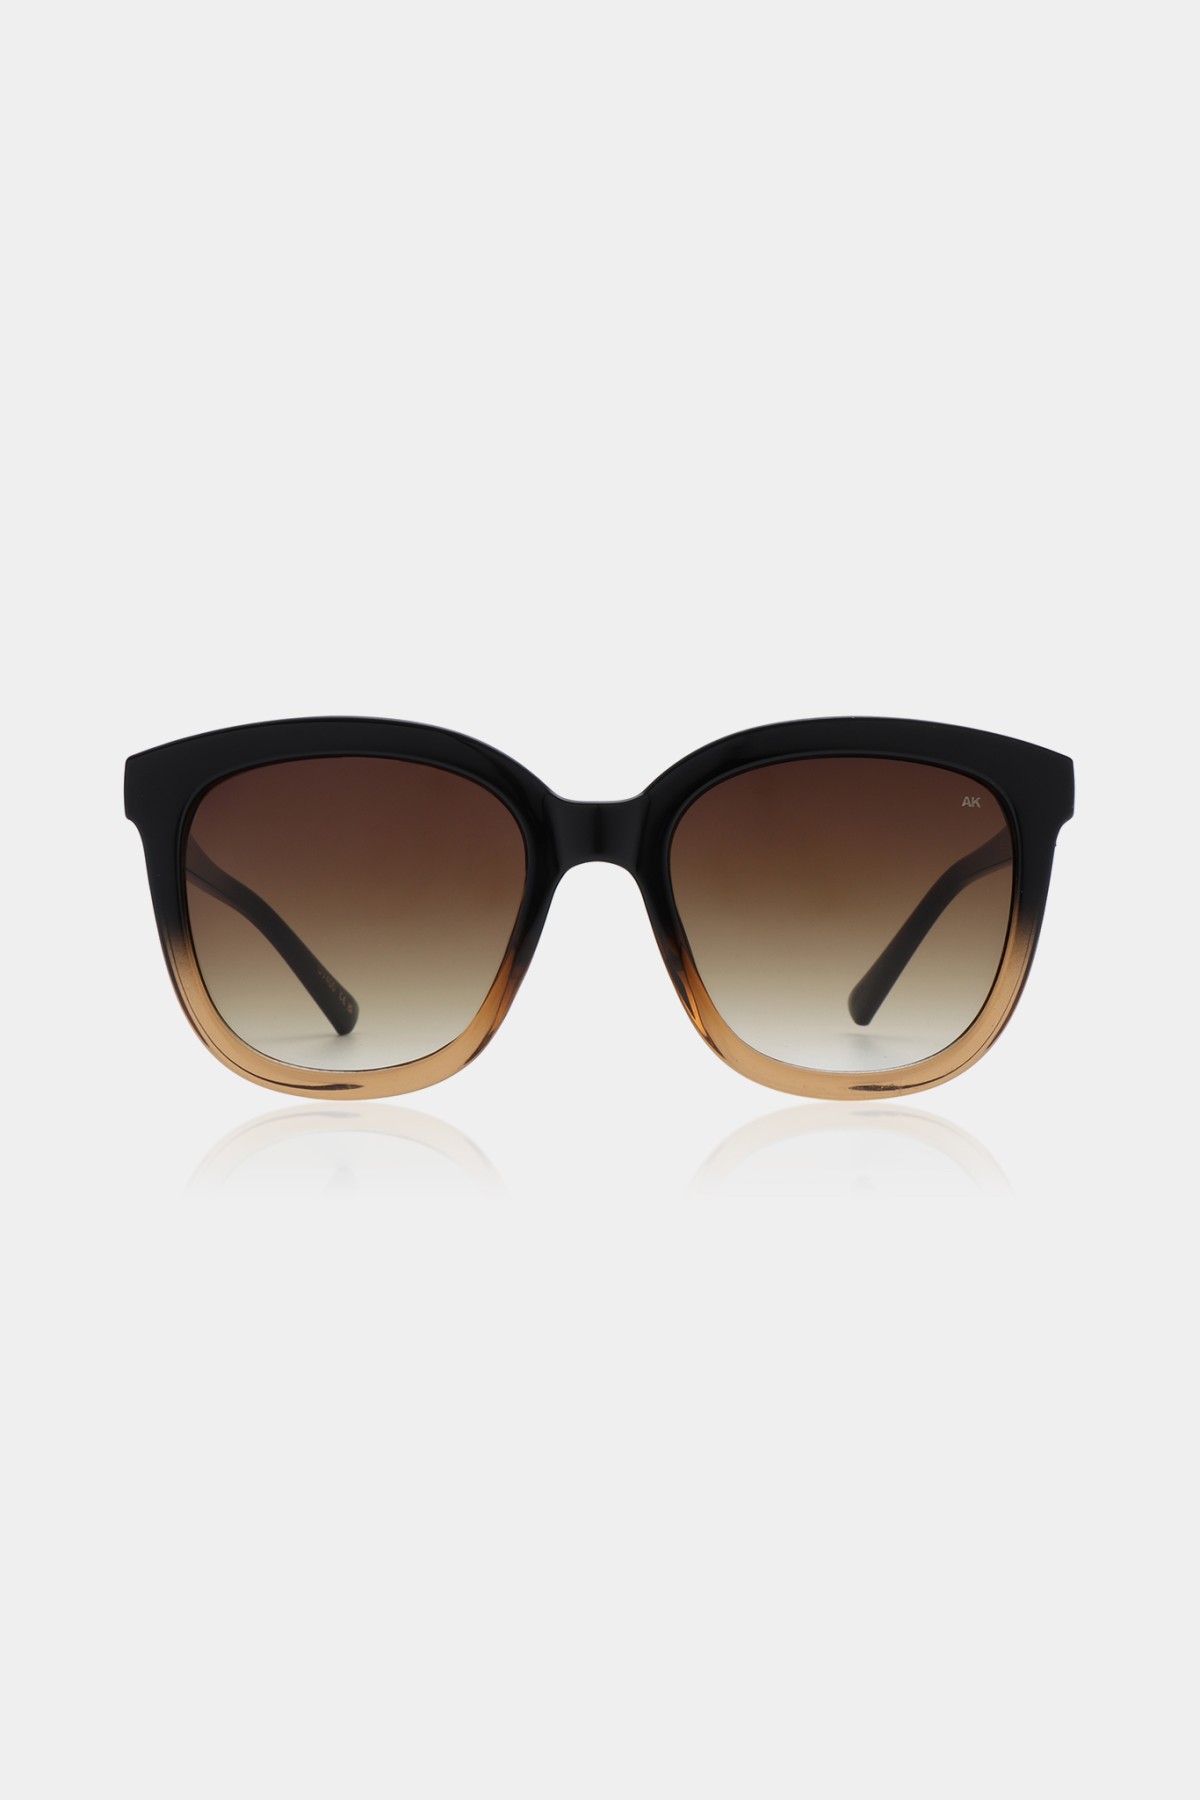 SUNGLASSES BLACK/BROWN -  BILLY – UV 400 PROTECTION